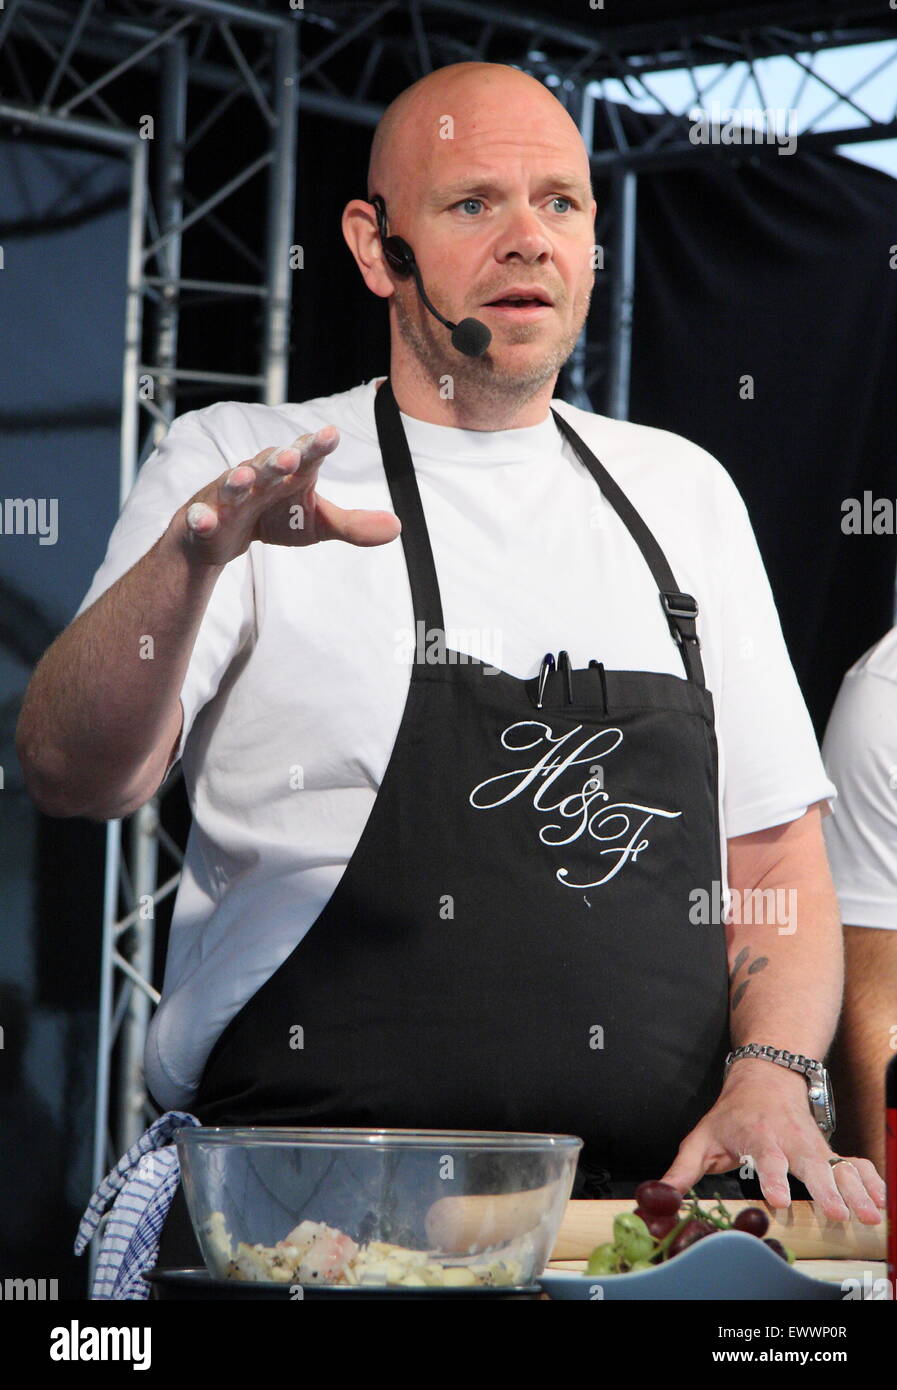 TV celebrity cook, tom Kerridge gives a cookery demonstration at Chatsworth Country Fair Derbyshire England UK Stock Photo